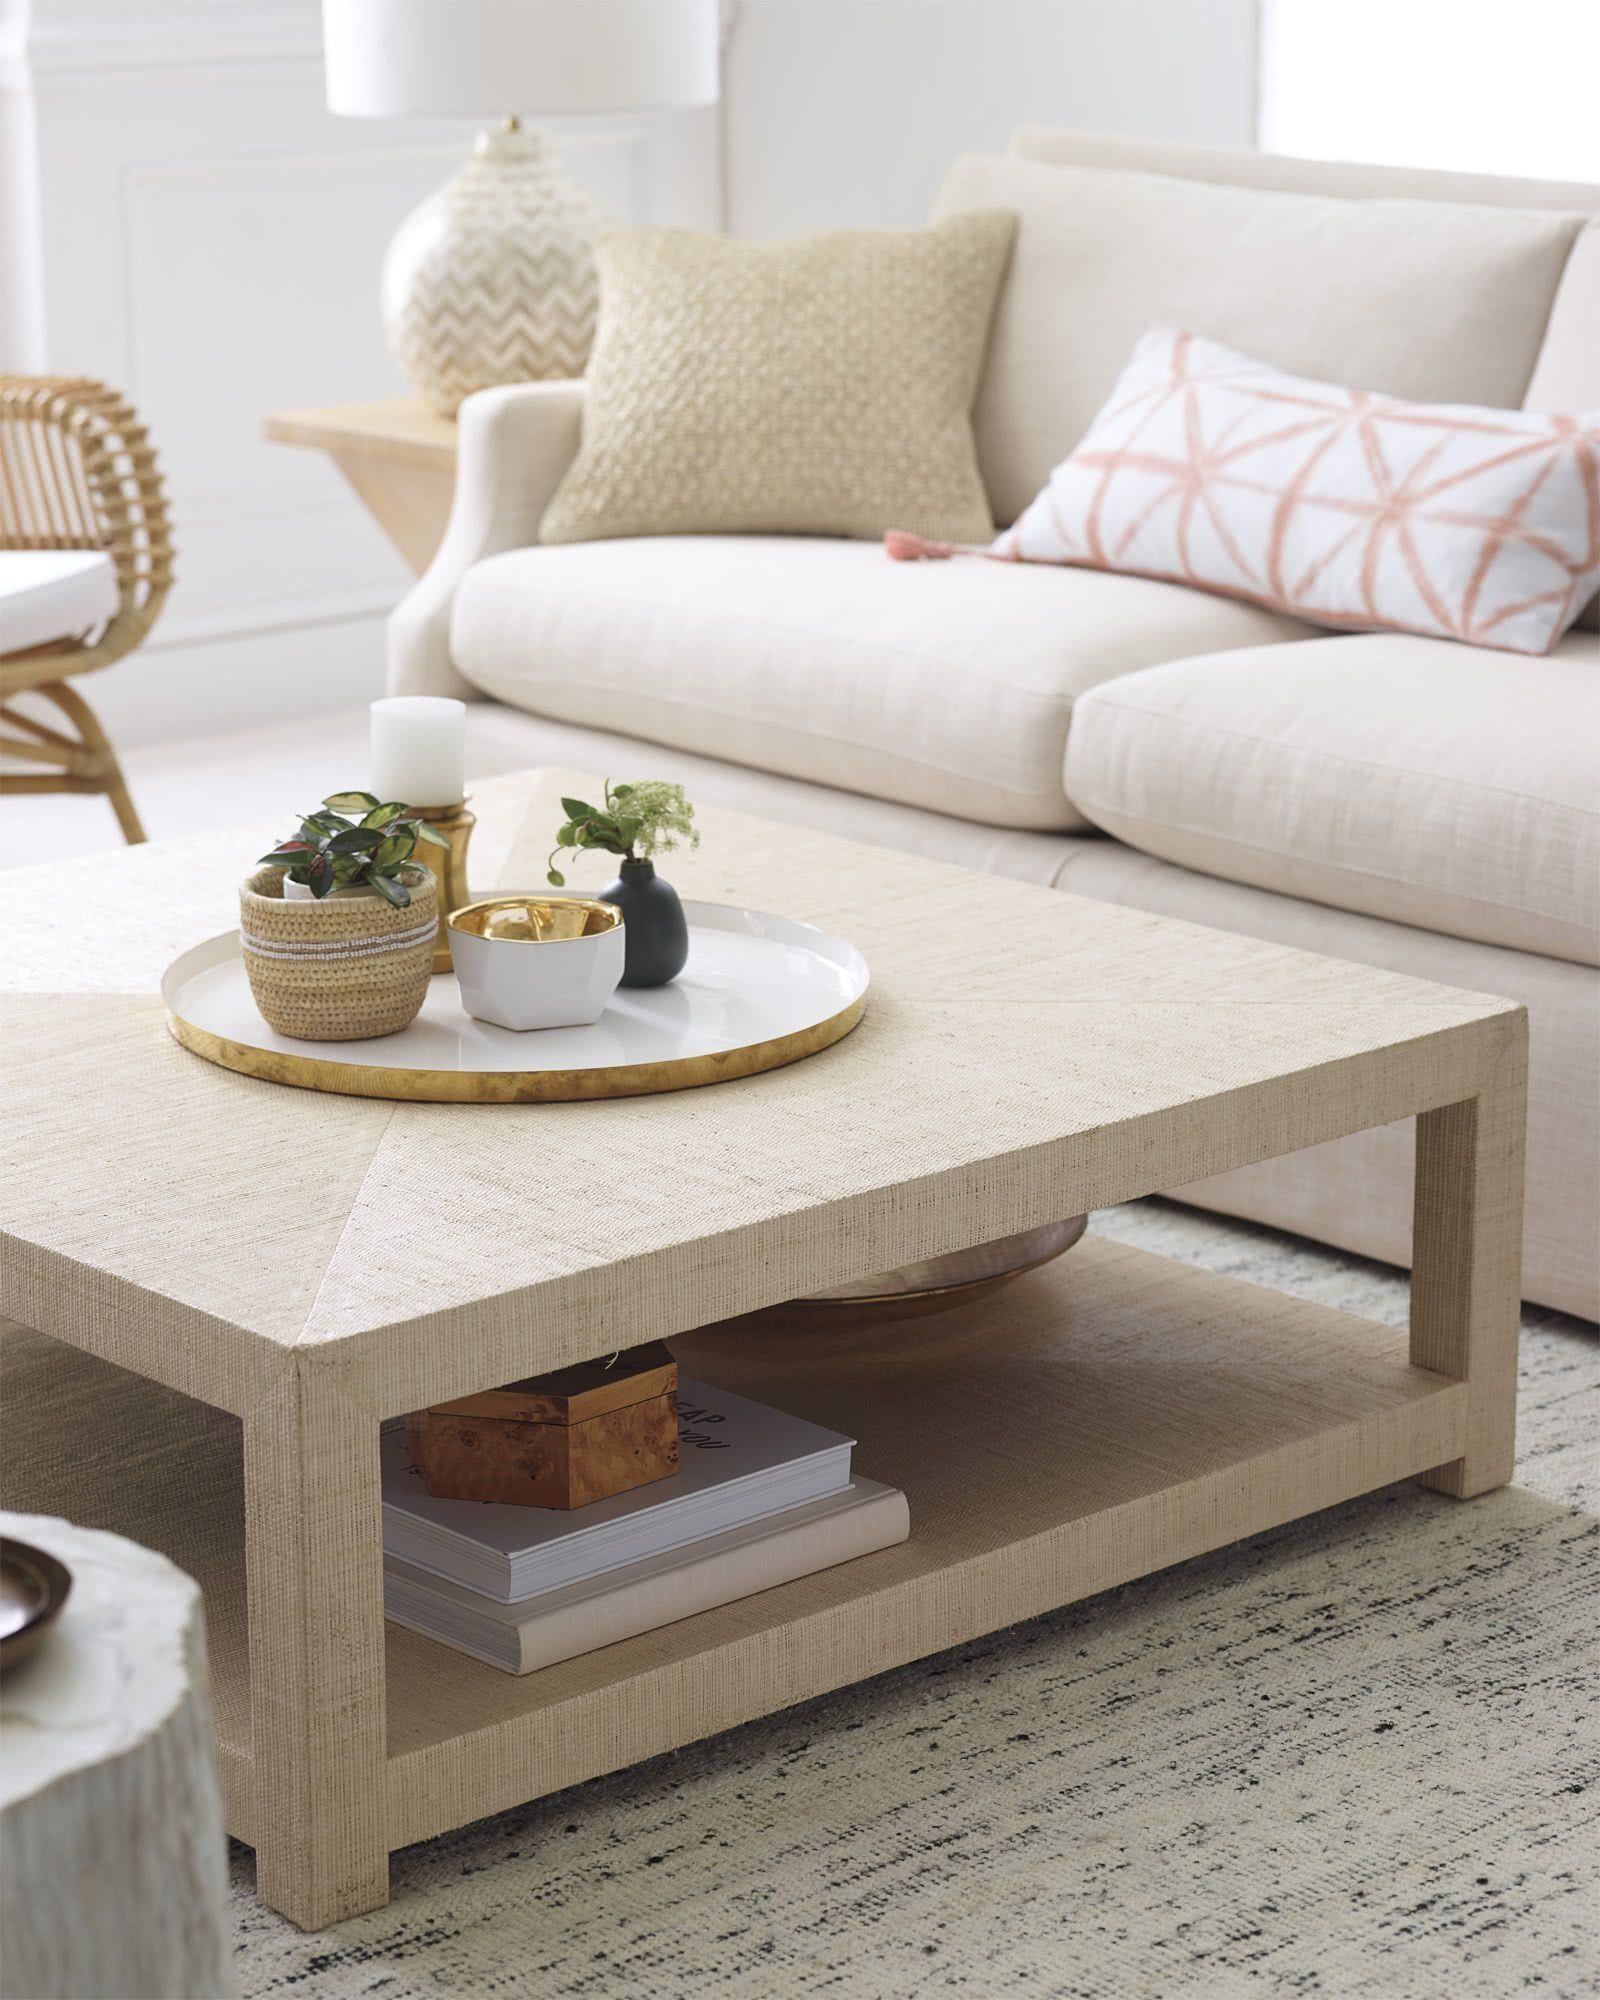 How To Decorate Your Square Coffee Table With Style – Coffee Table Decor Regarding Transitional Square Coffee Tables (View 8 of 20)